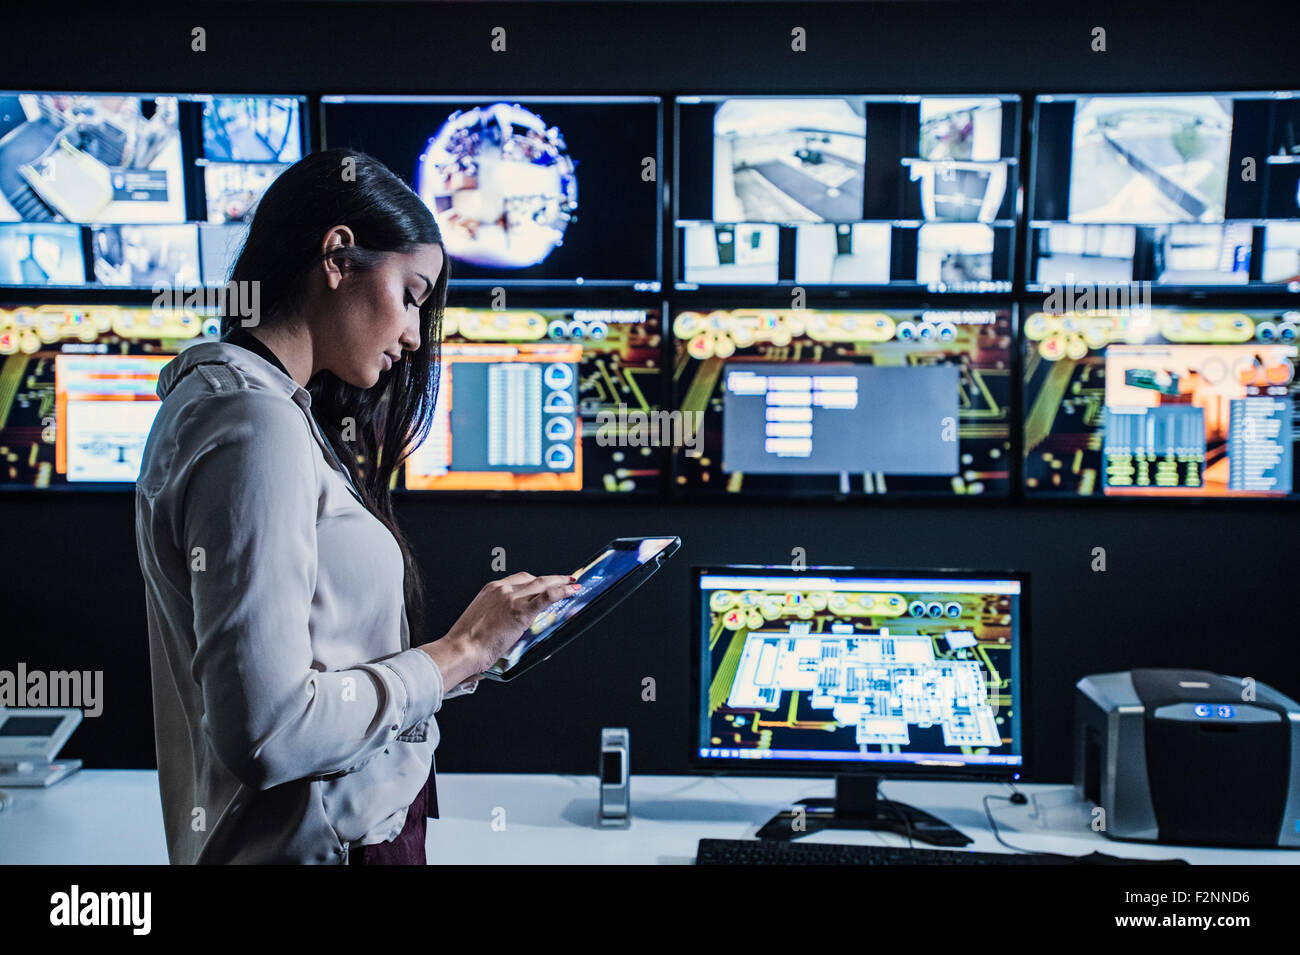 Hispanic security guard using digital tablet in control room Stock Photo